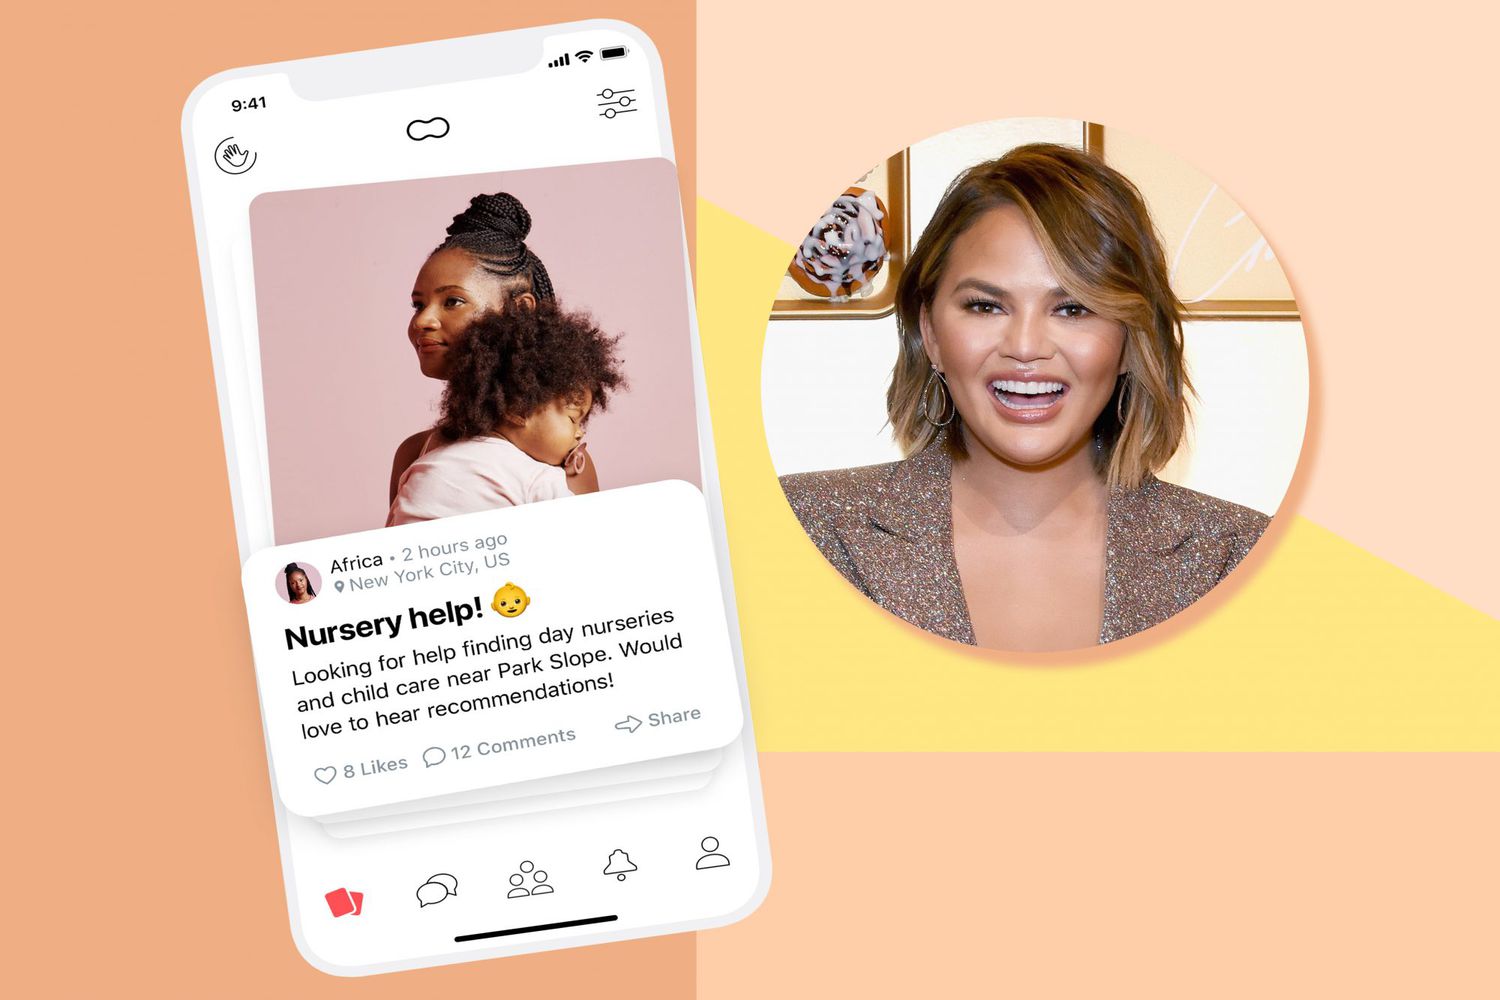 An image of the Peanut App next to an image of Chrissy Teigen.